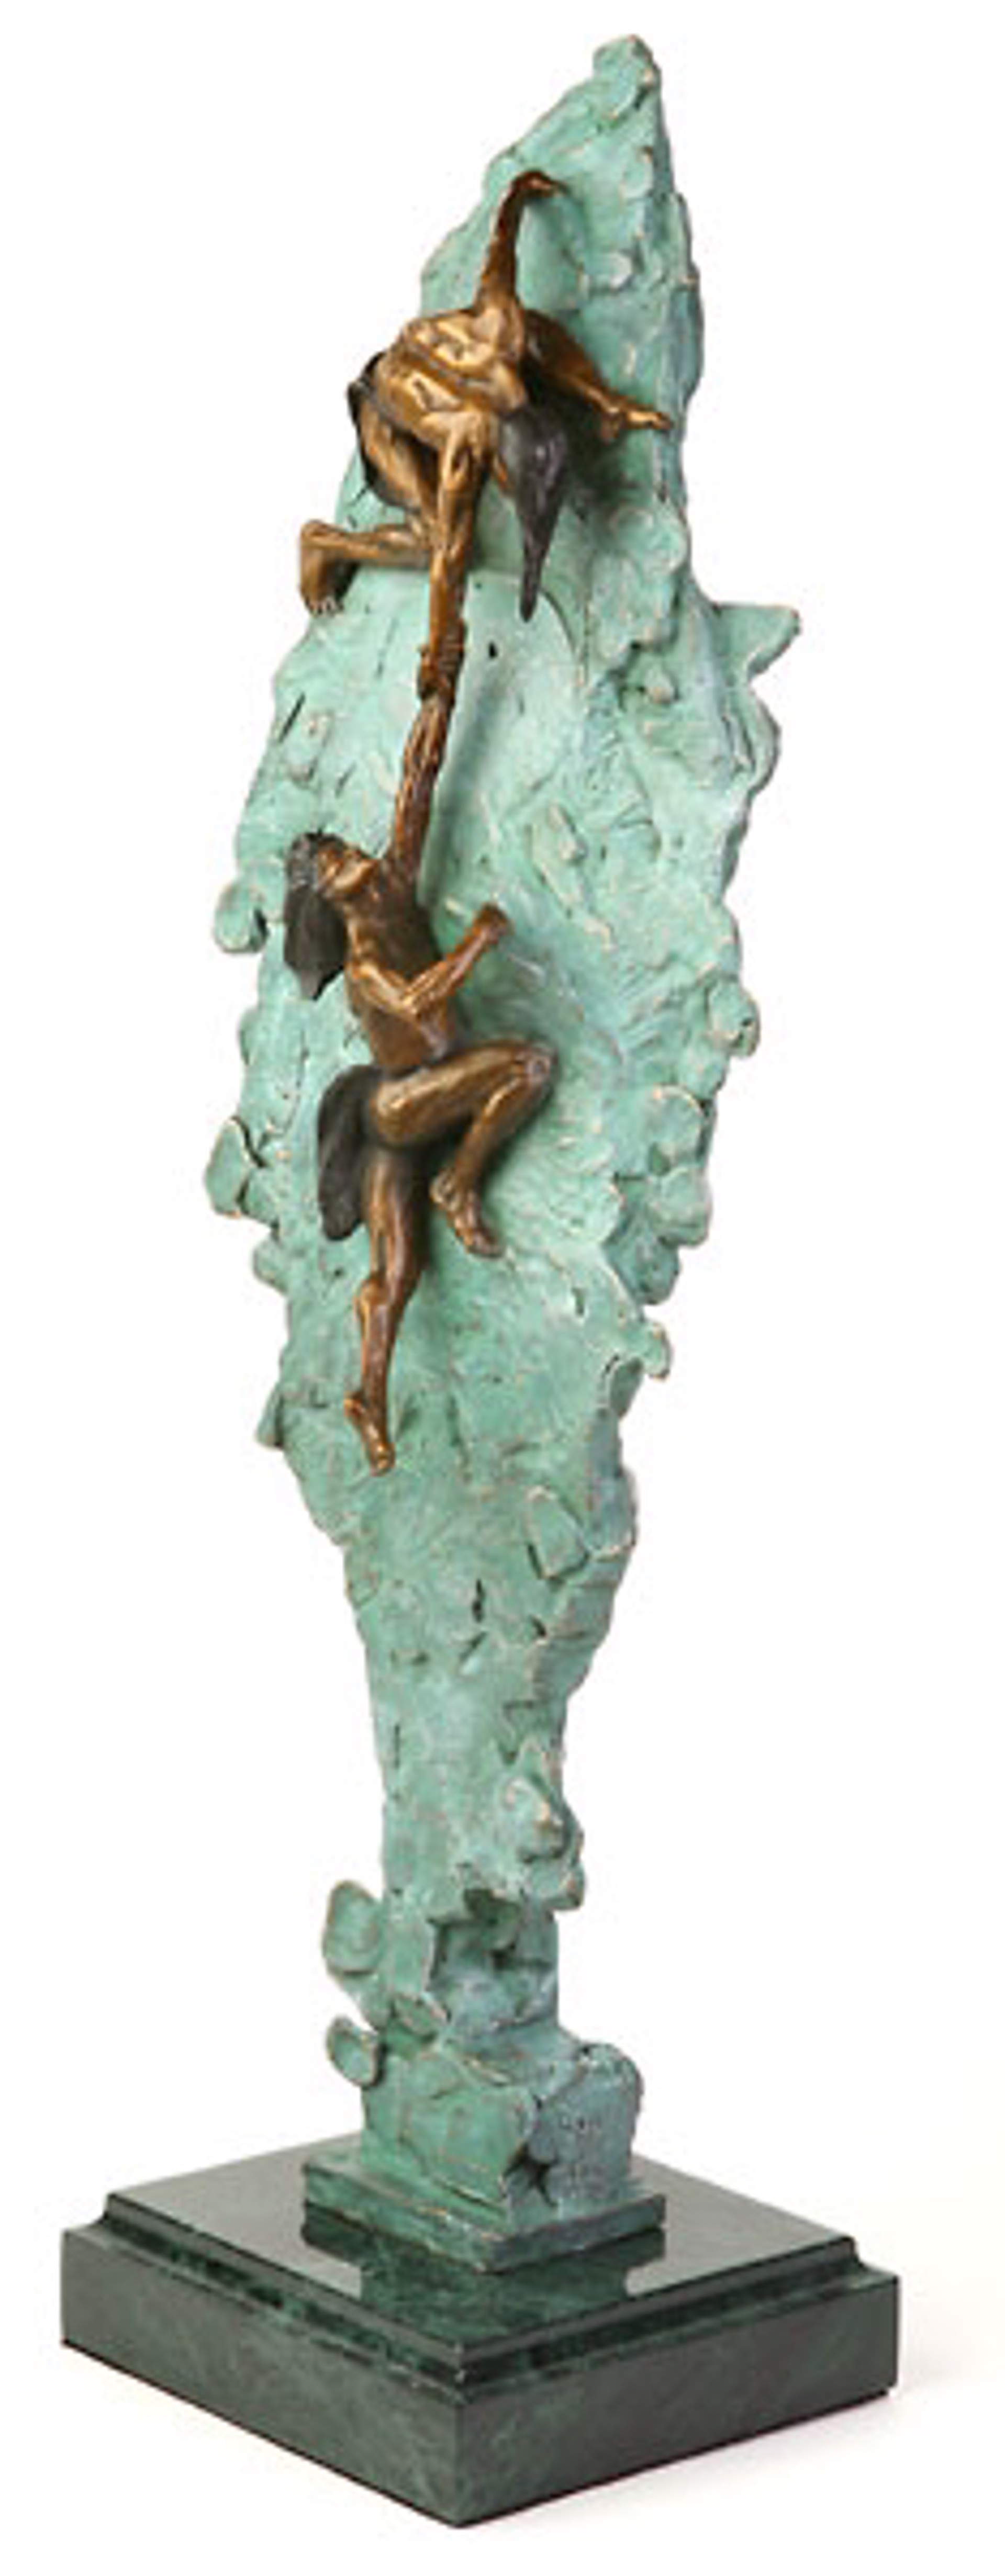 Ascent Freestanding  28" by Gary Lee Price